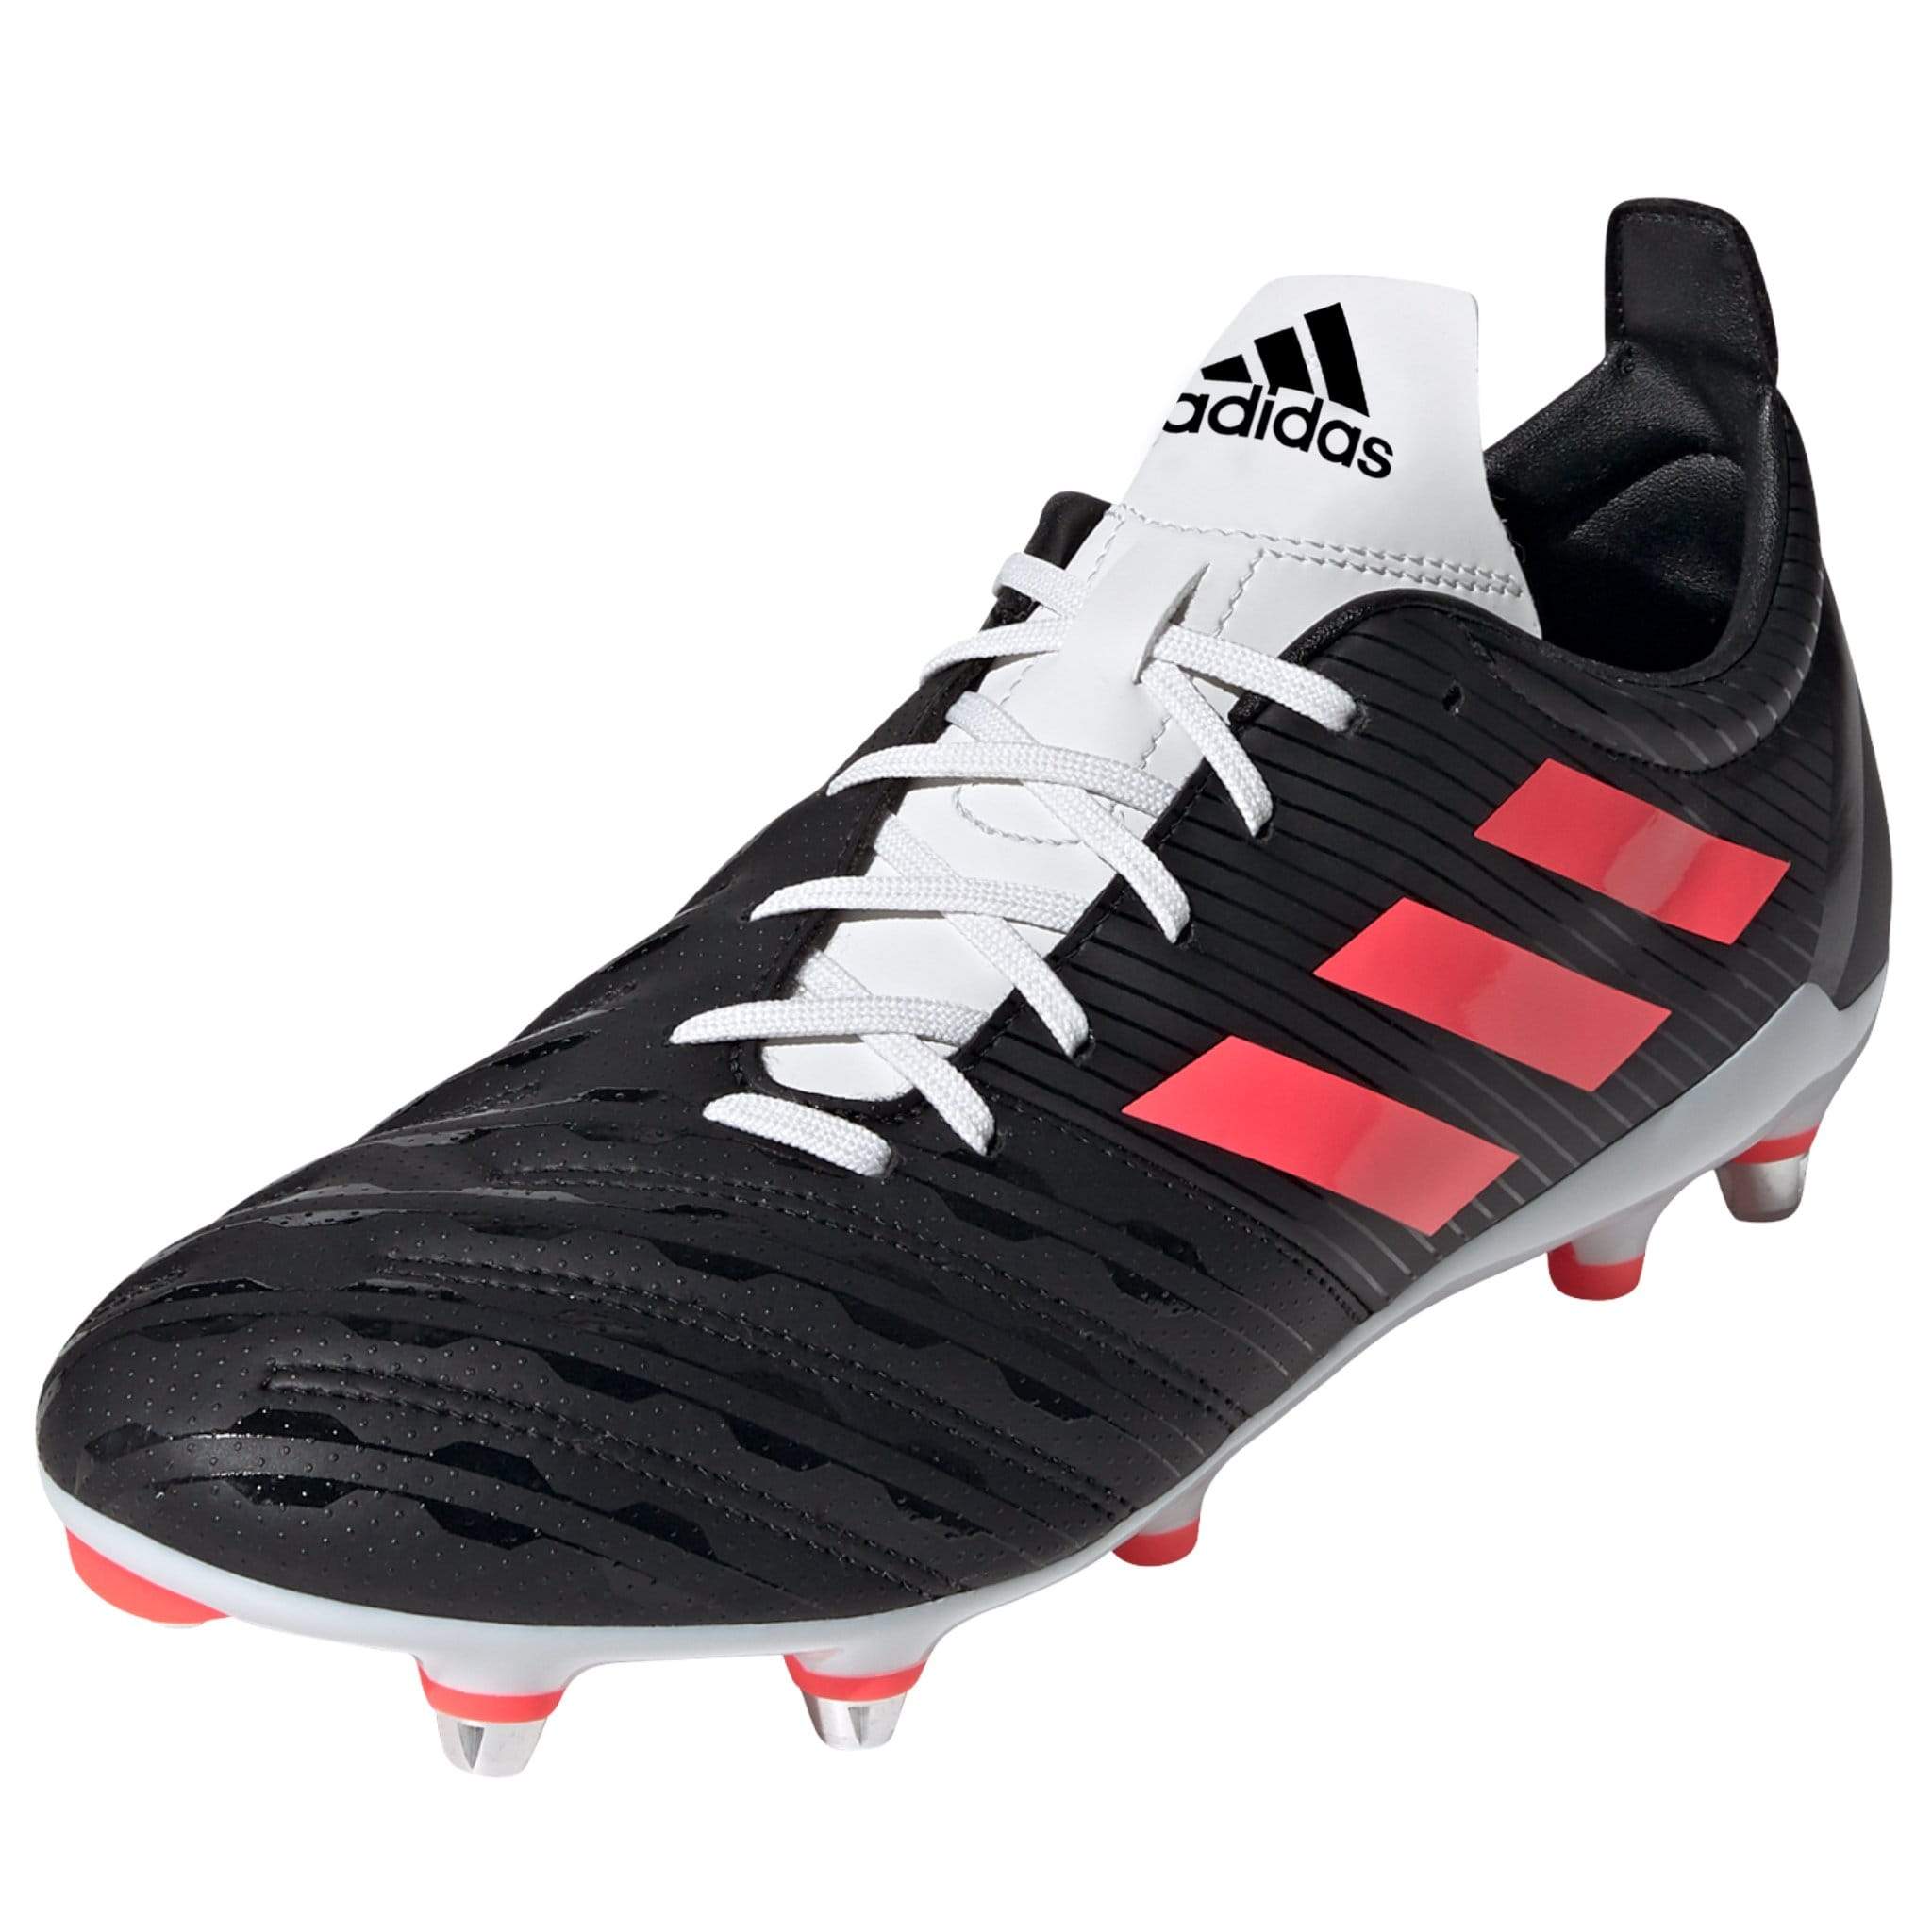 new adidas rugby boots 2019